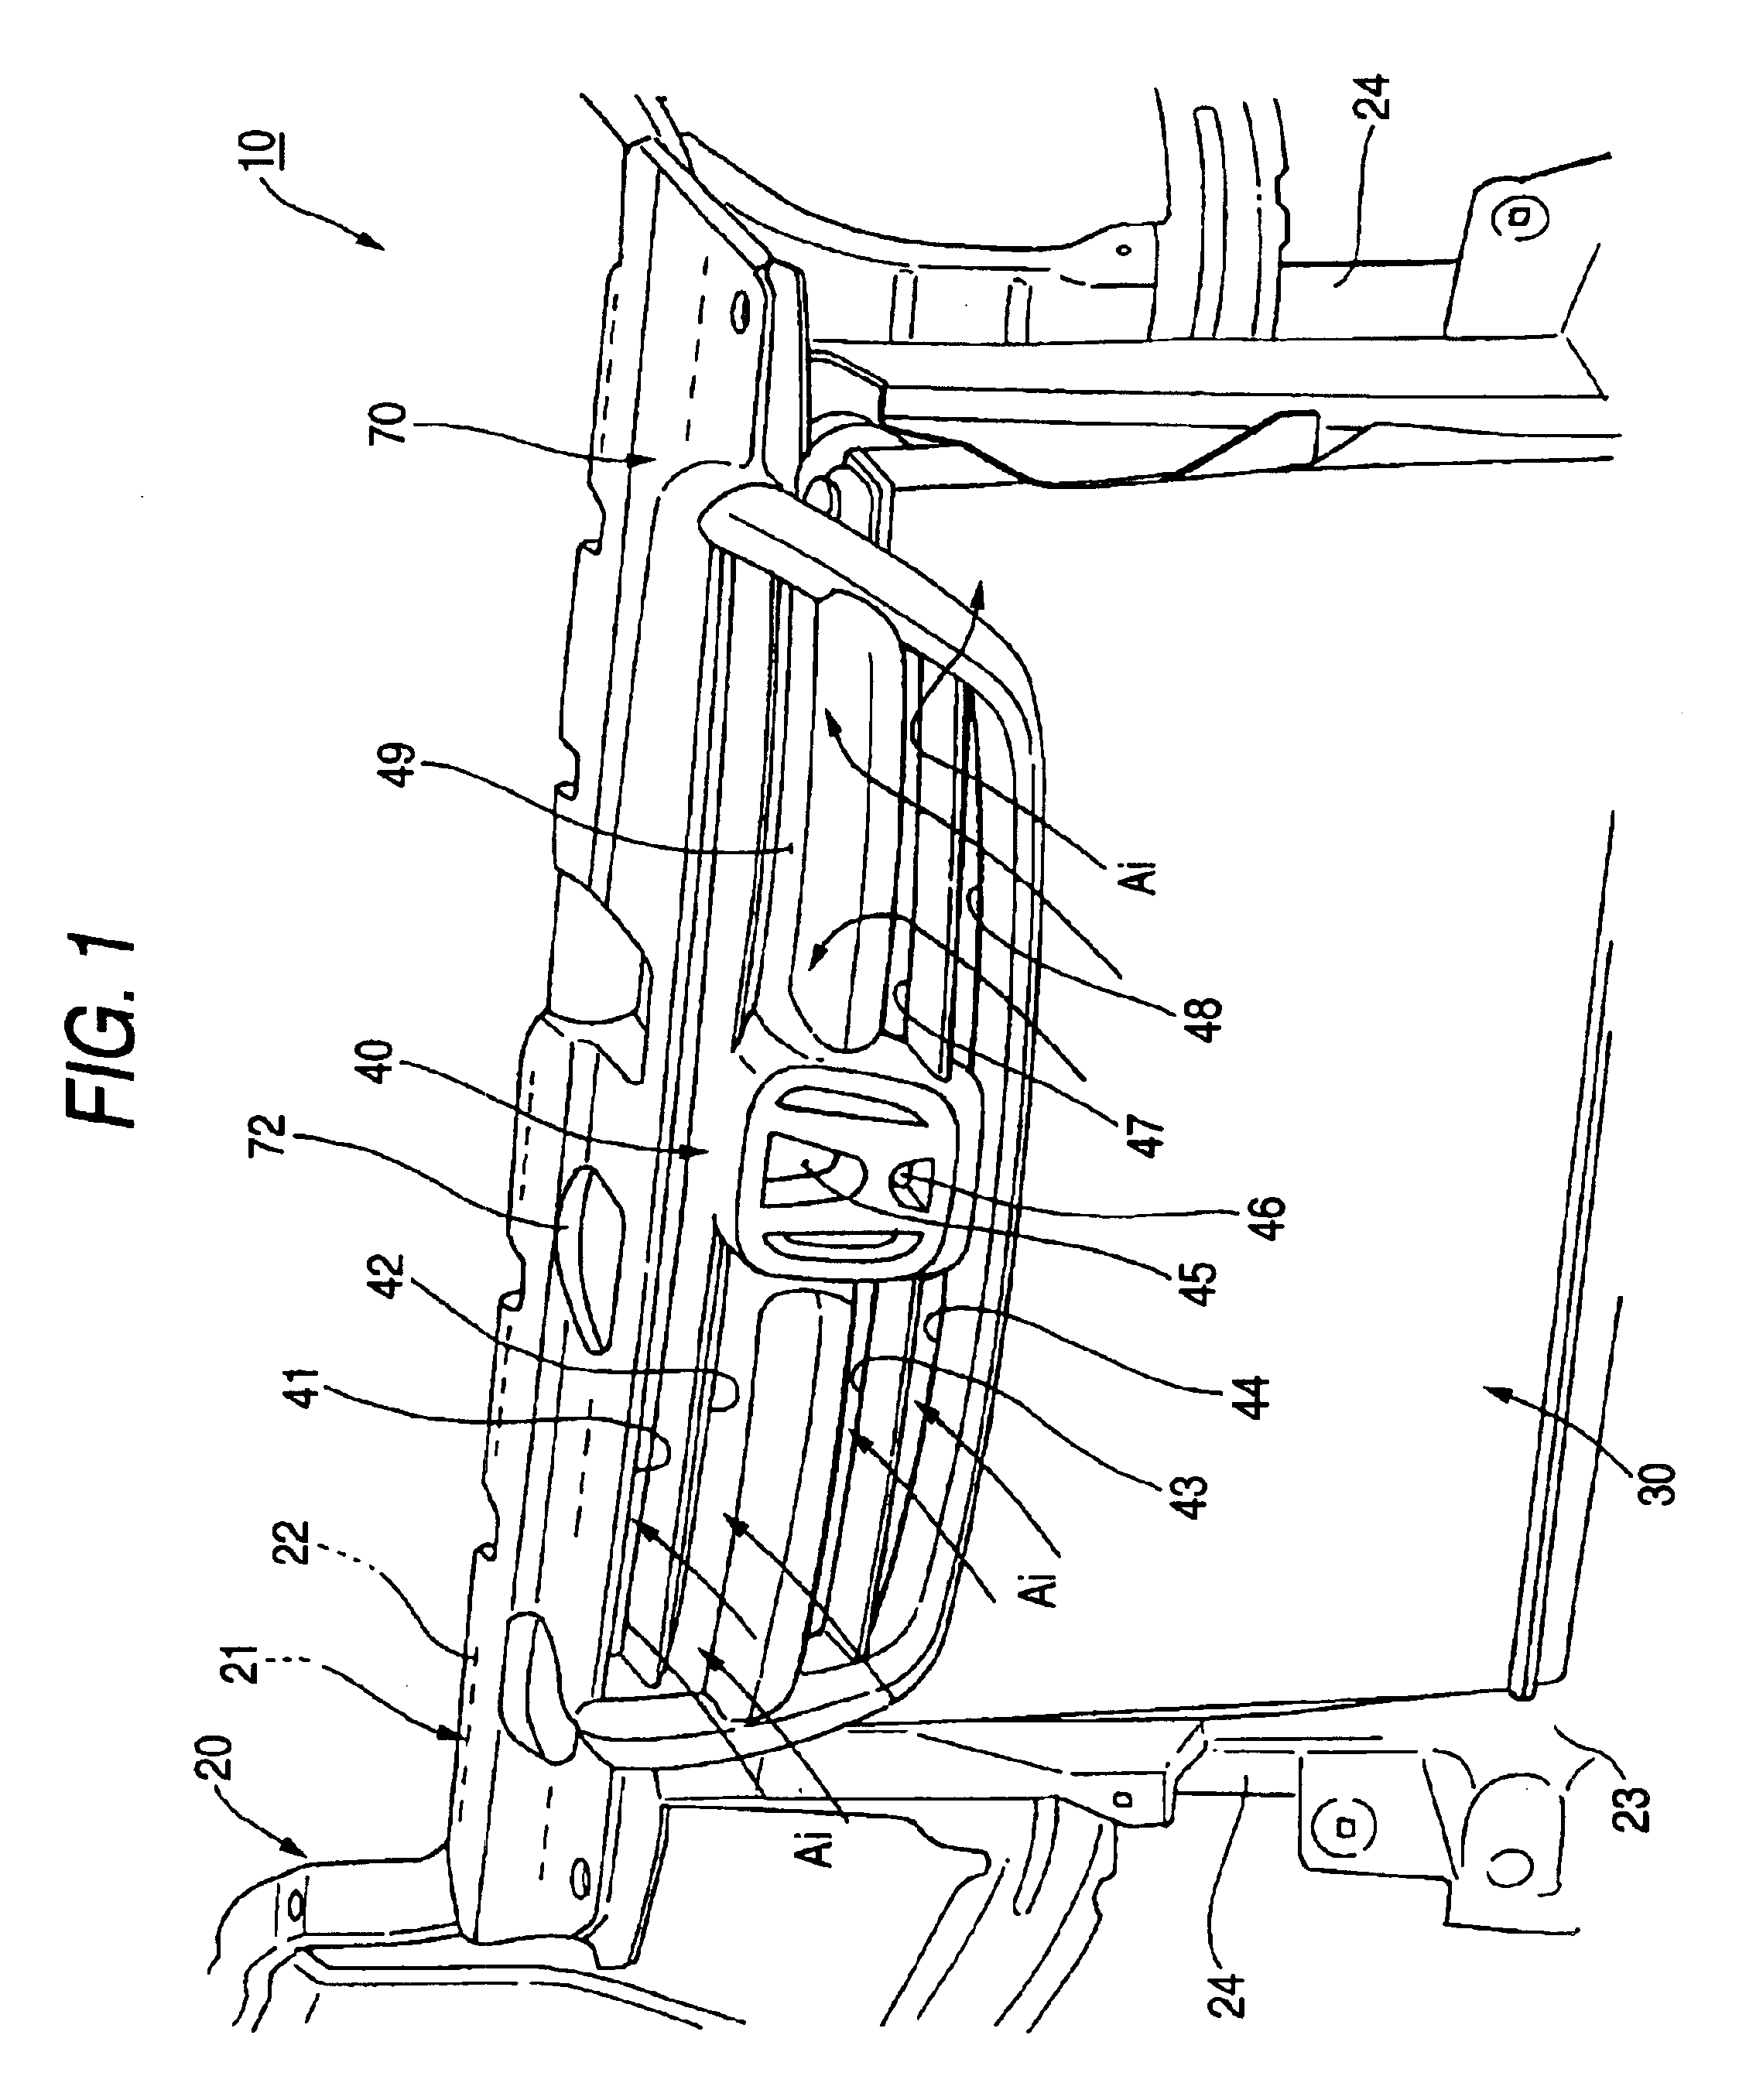 Air-intake structure around front grille for vehicle